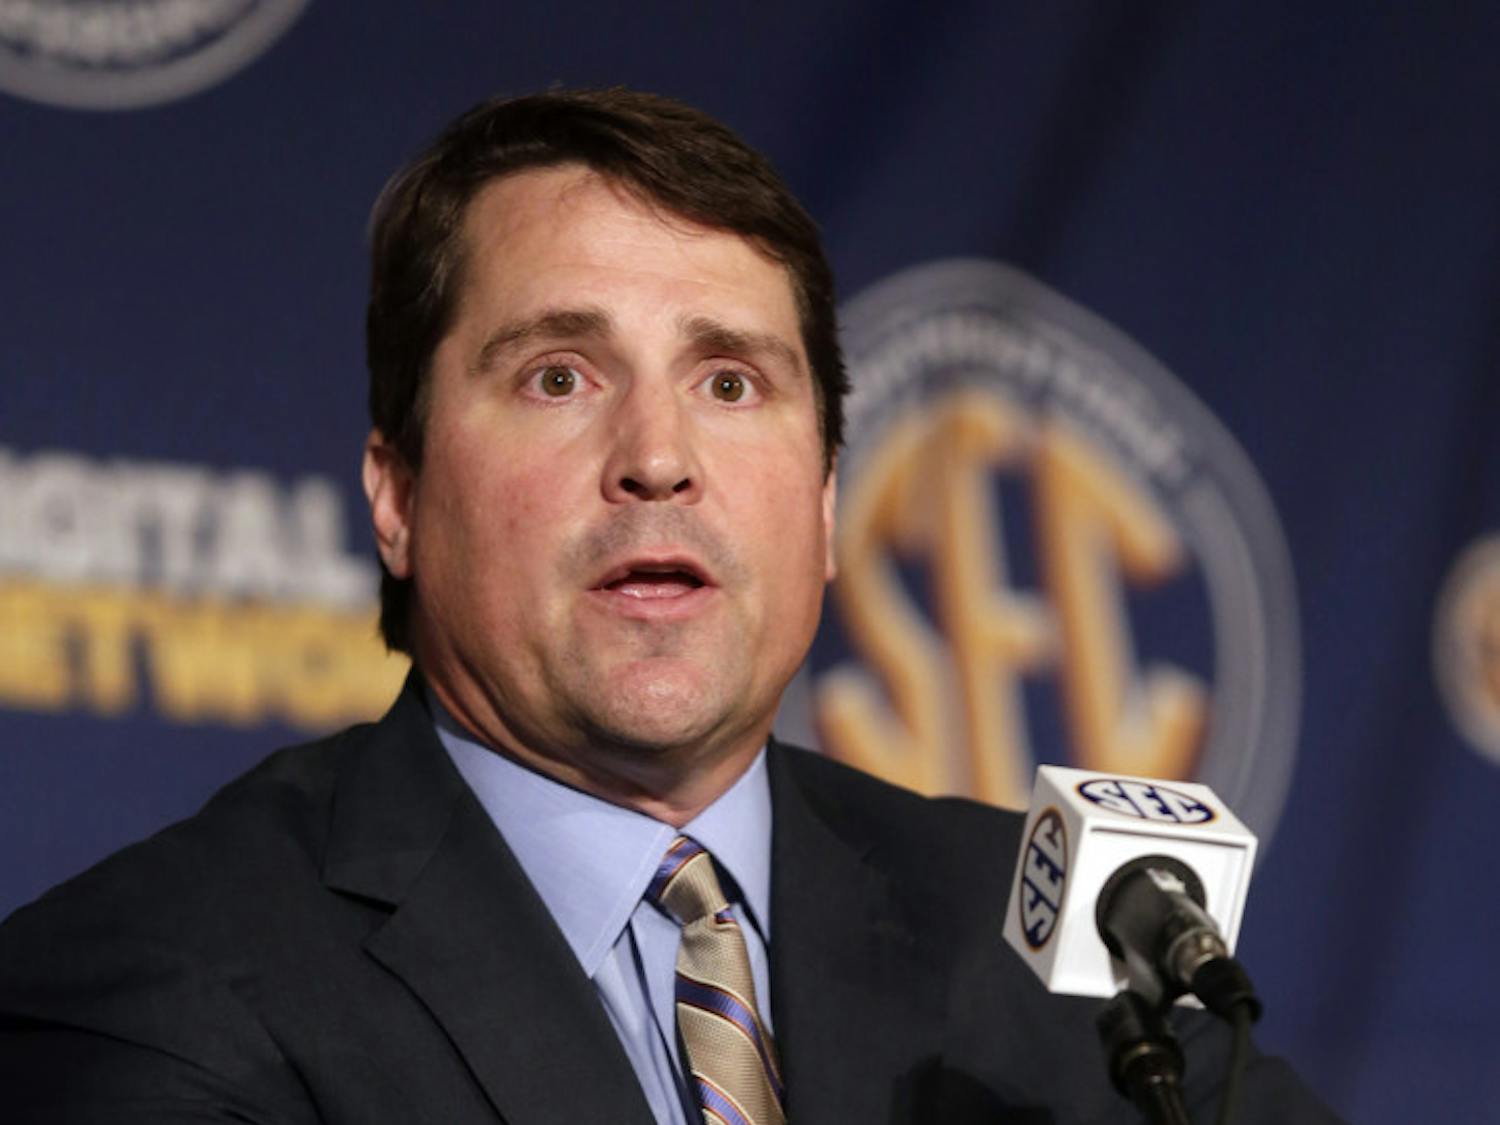 Florida coach Will Muschamp talks with reporters during the Southeastern Conference football Media Days in Hoover, Ala., on July 16, 2013. Muschamp held a football camp over the weekend for potential recruits. 